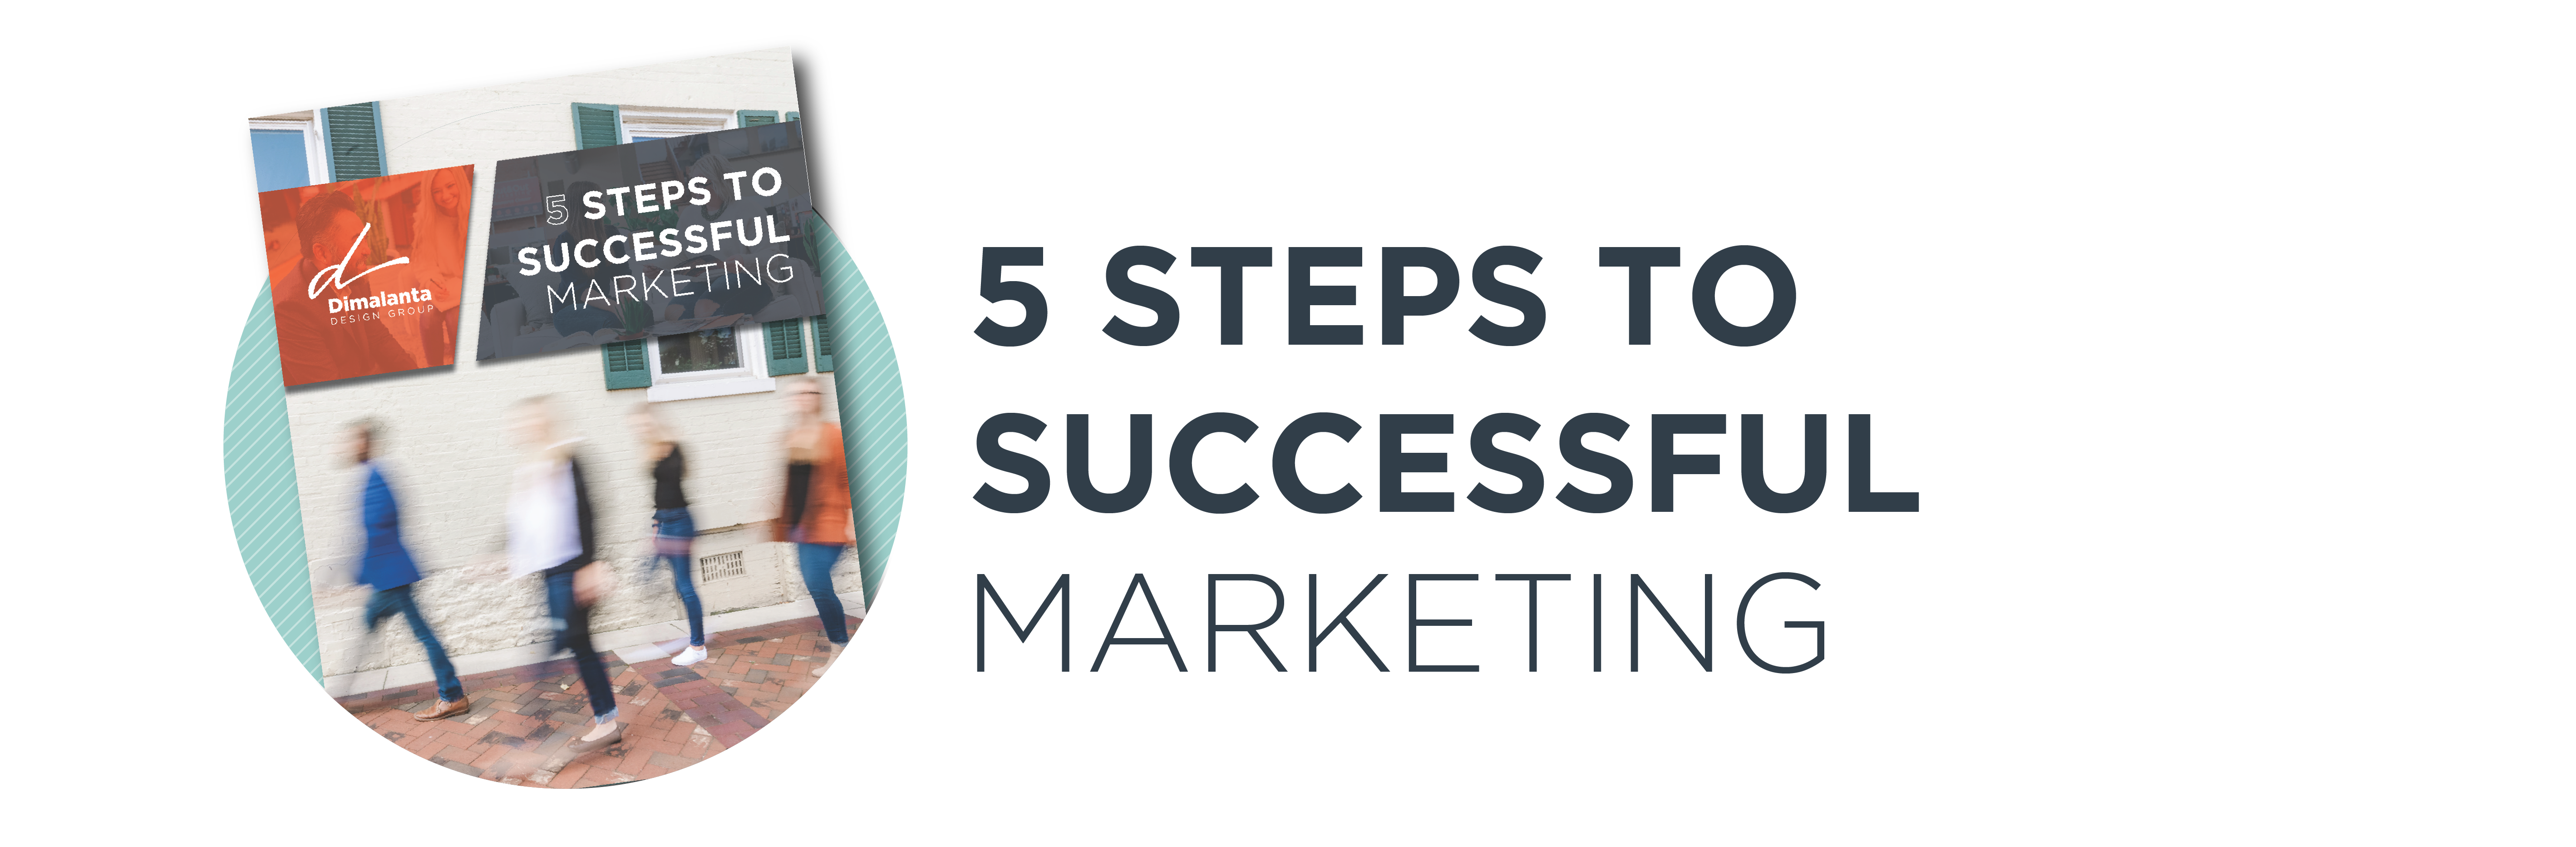 5 Steps to successful marketing_Successful